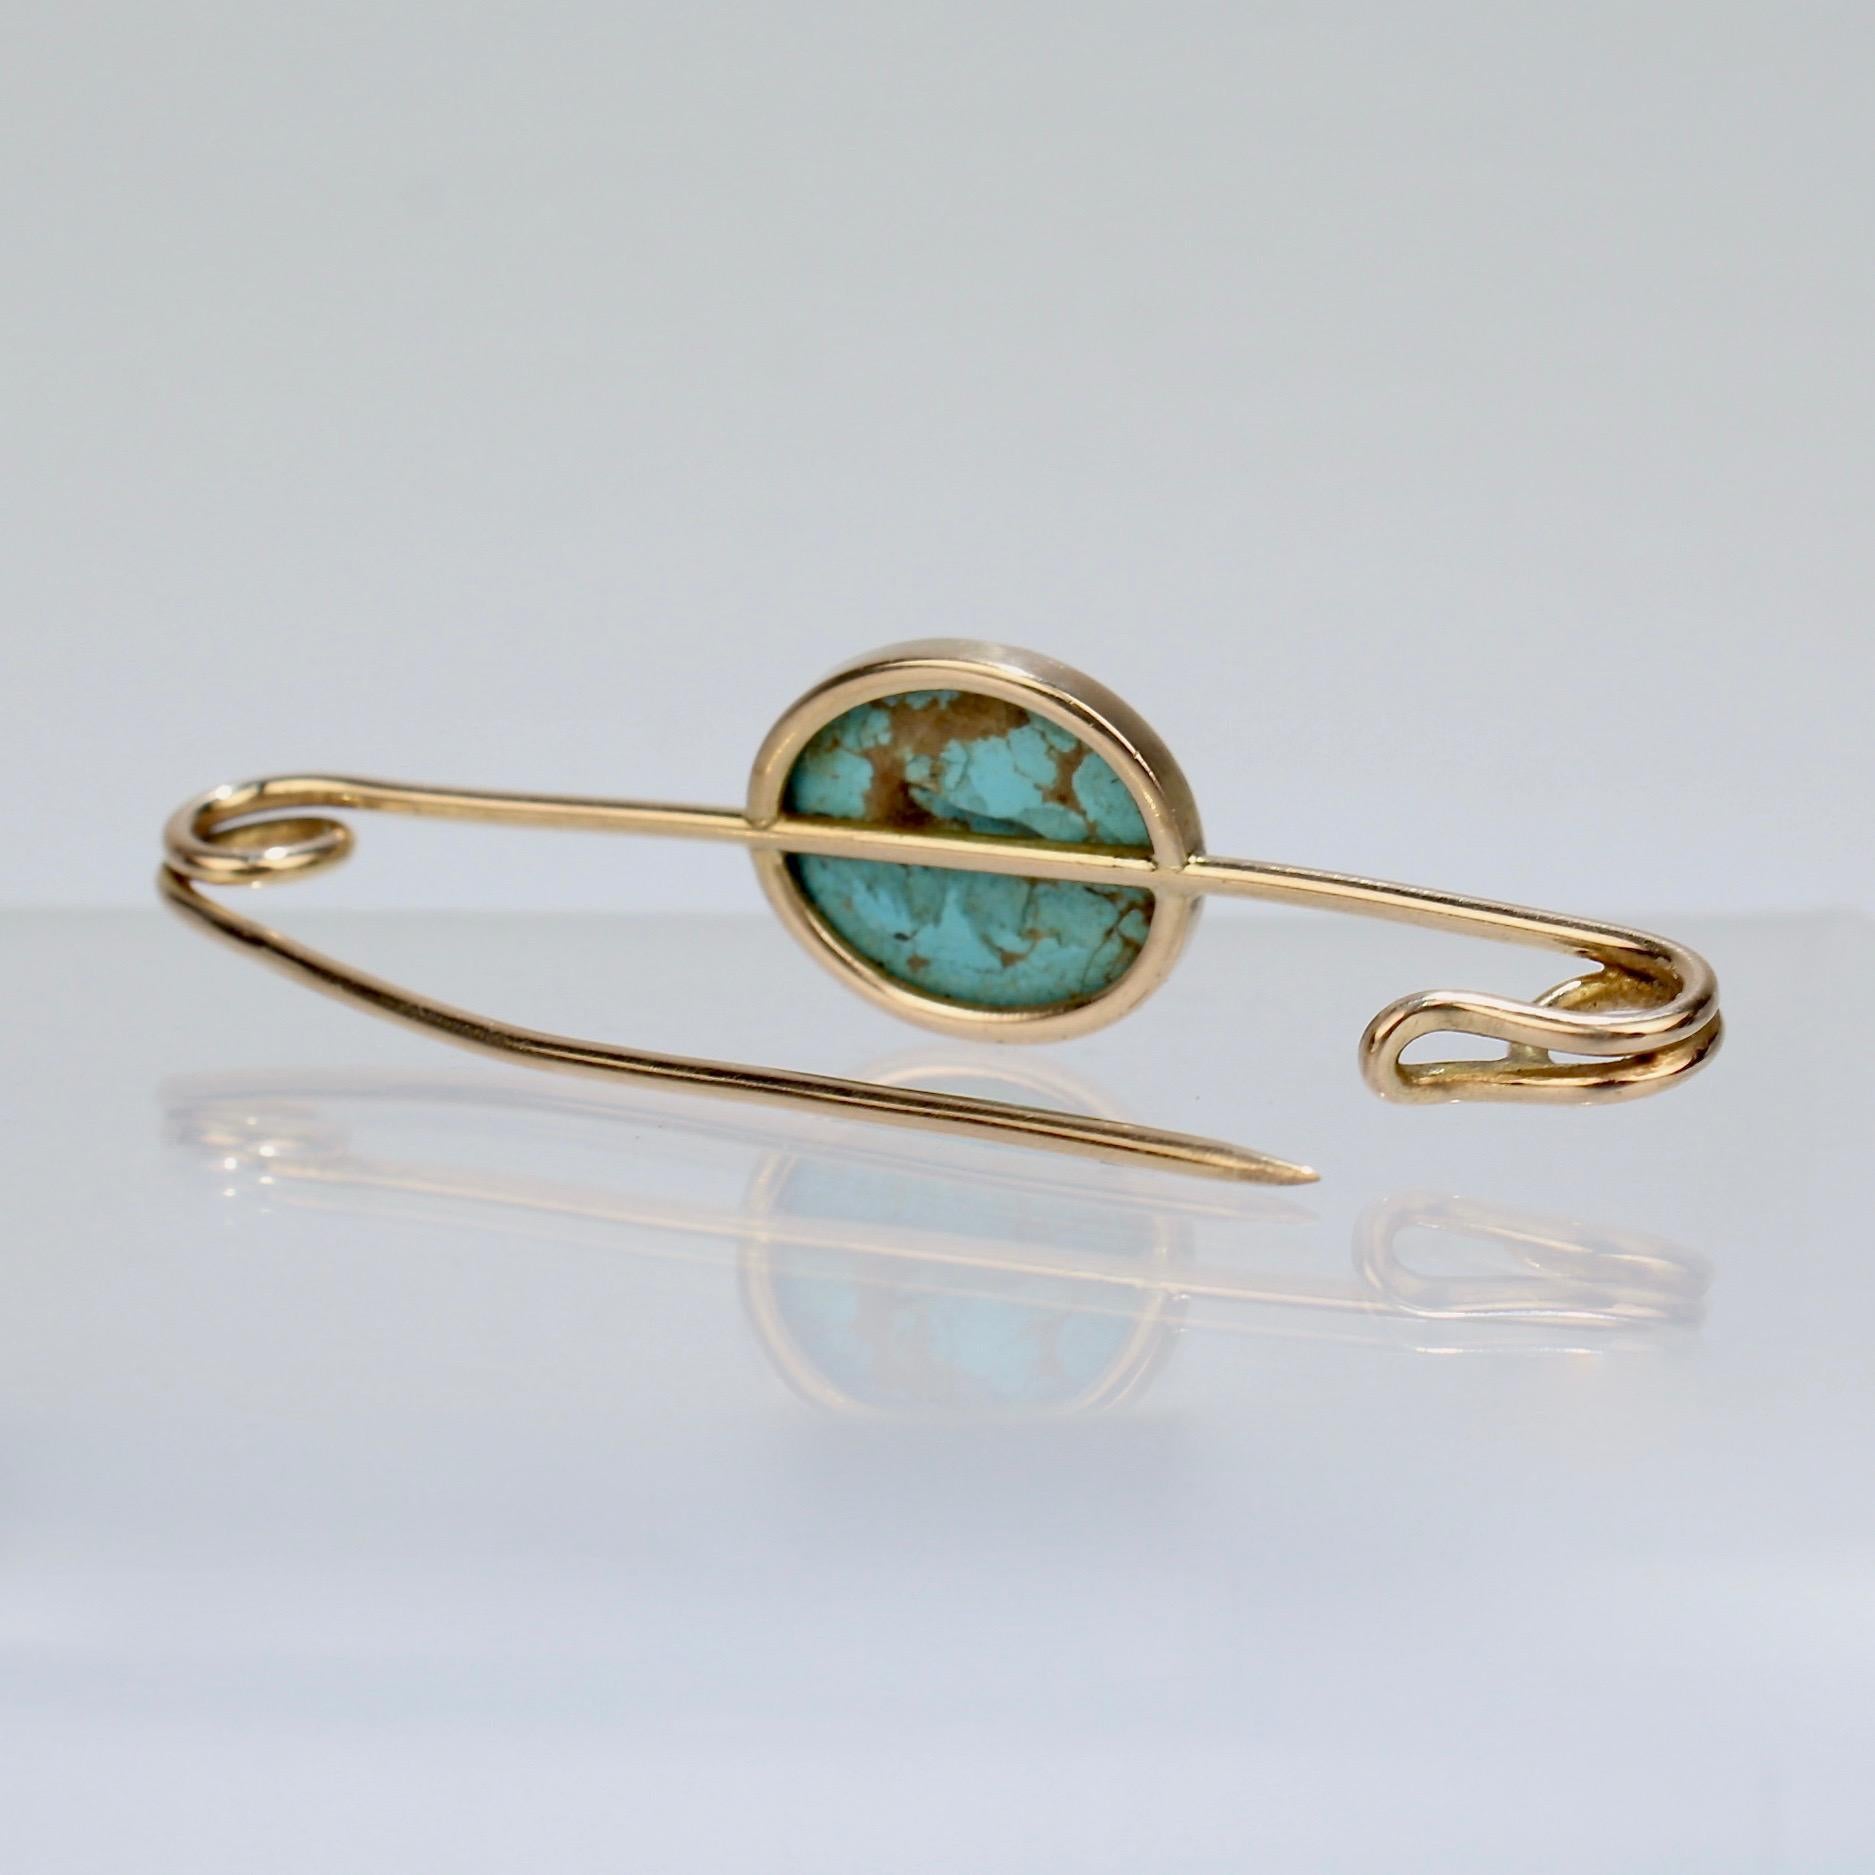 Modern Large 14 Karat Gold and Turquoise Cabachon Brooch or Scarf Pin